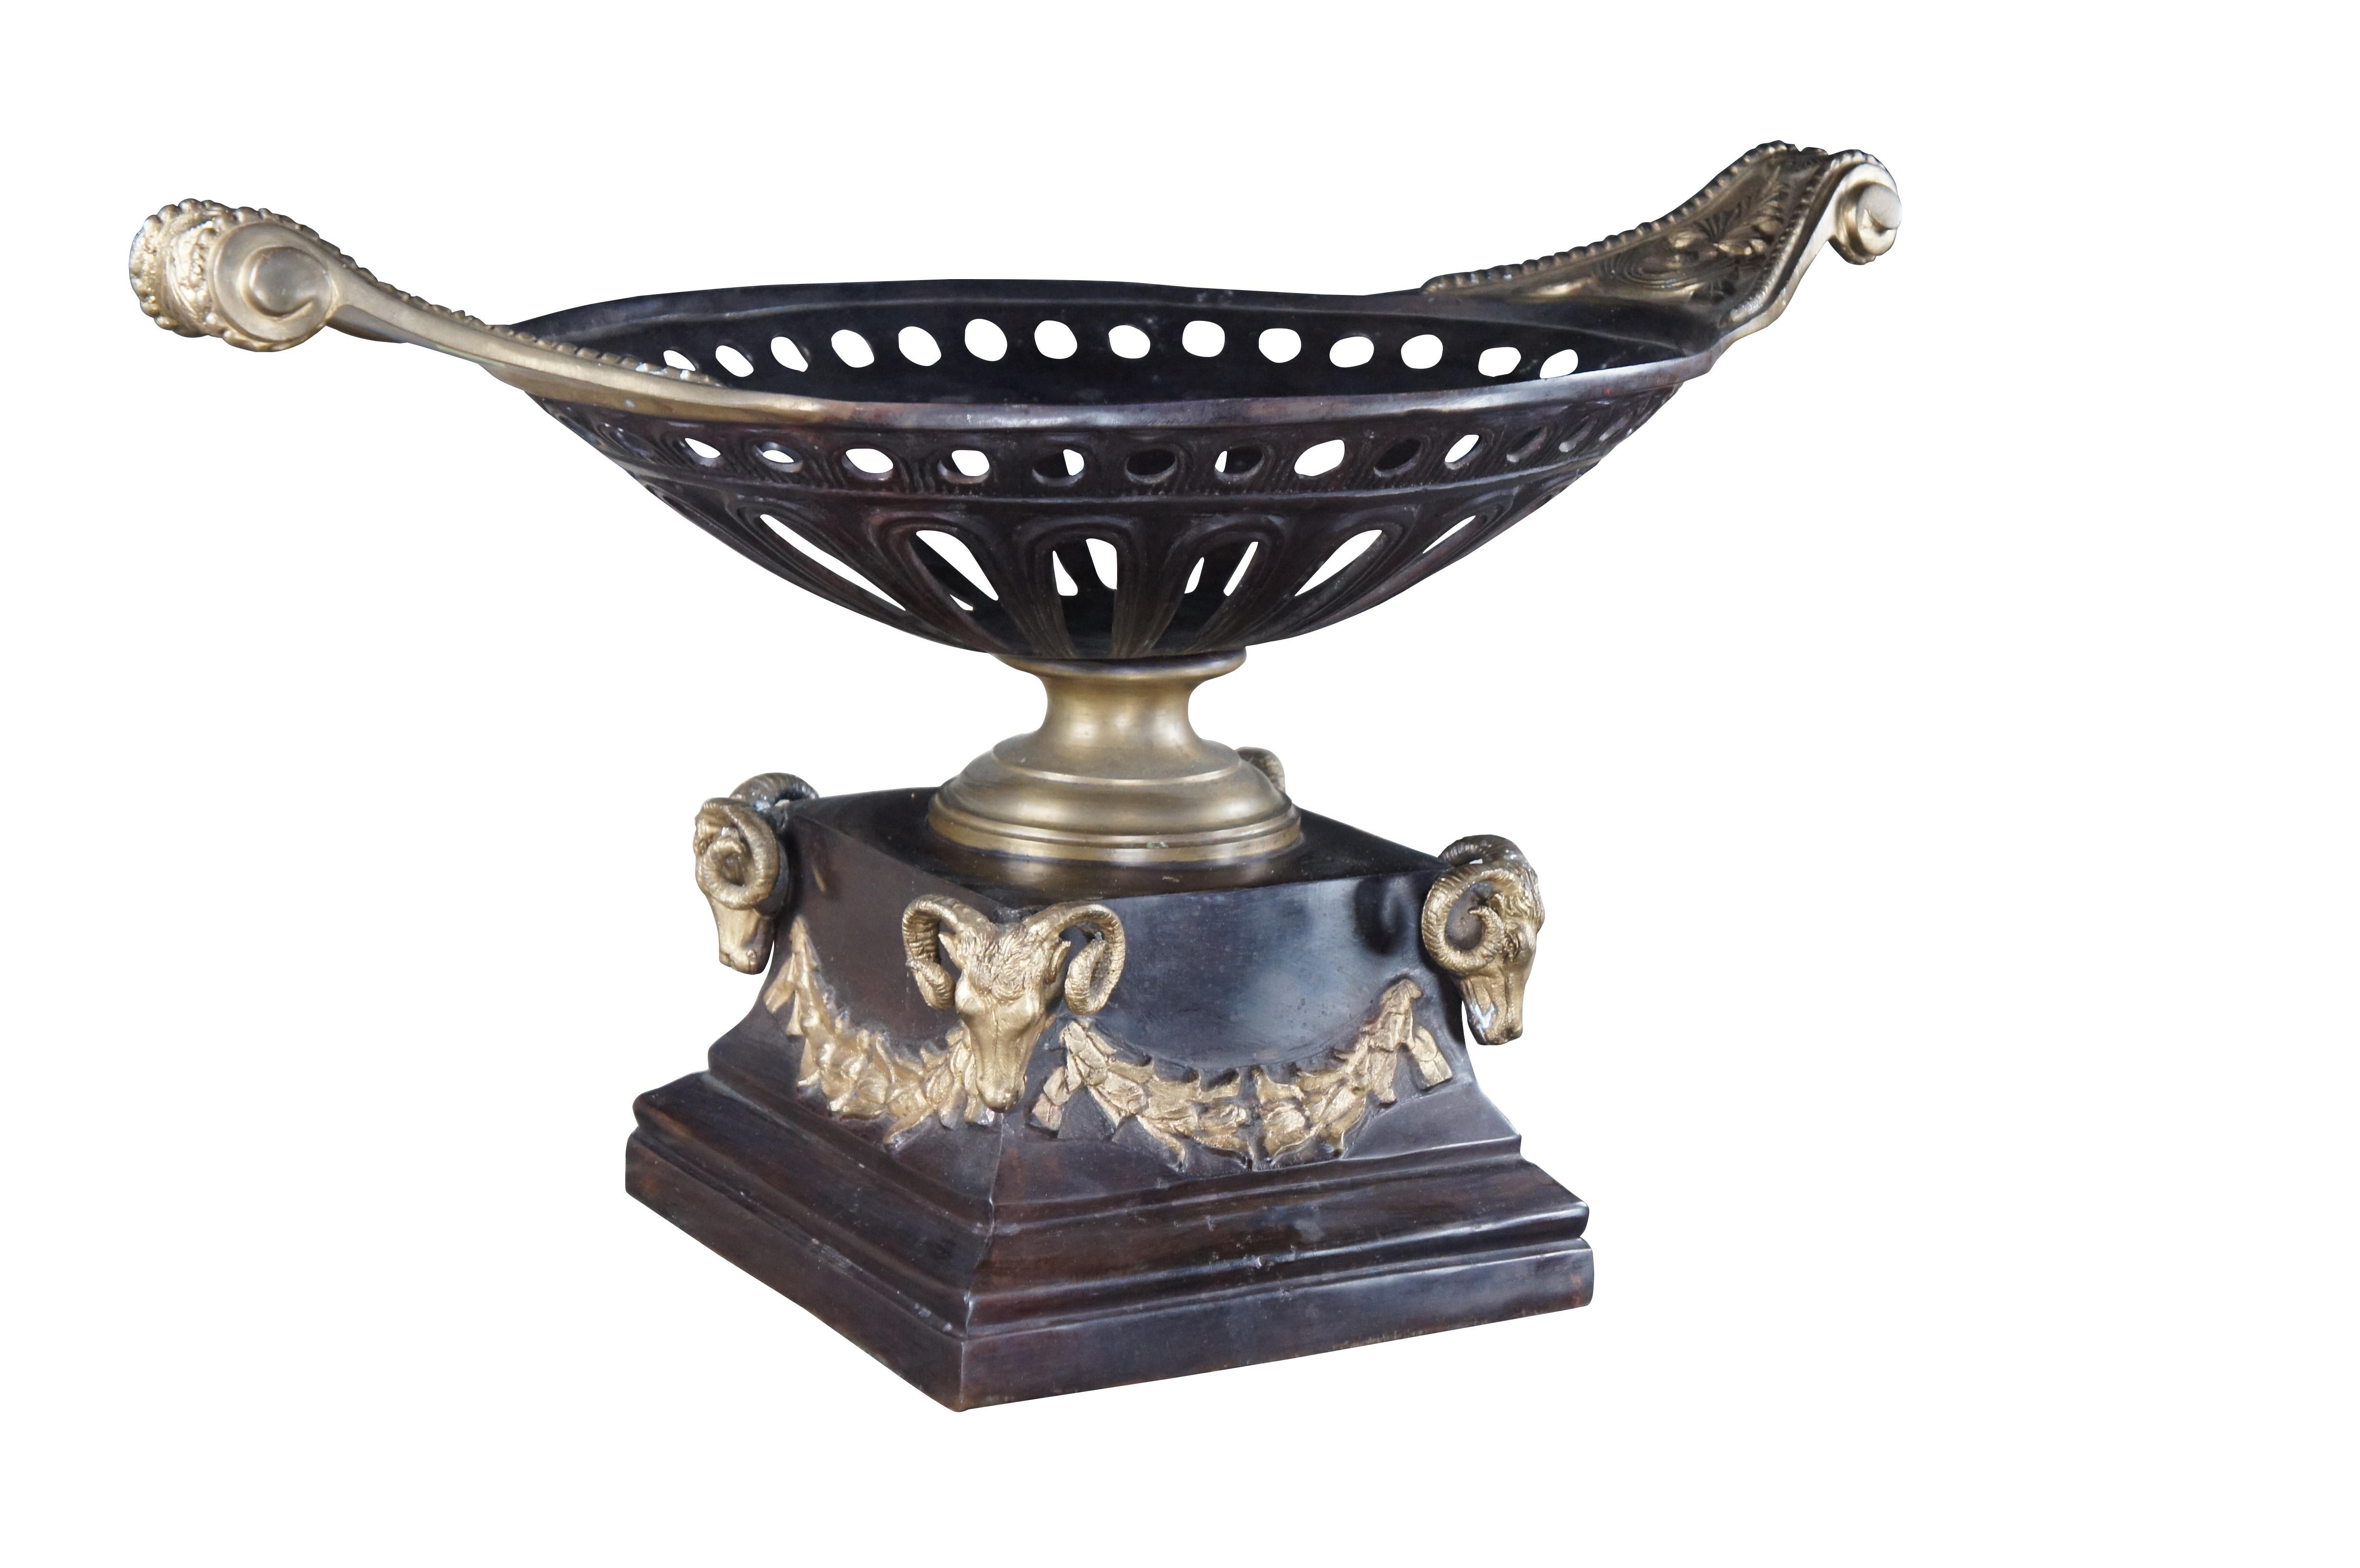 Maitland Smith English Regency inspired compote or centerpiece. Made from bronze with a two-tone reticulated bowl over a base with ornate rams heads at each corner. A great display piece that could be re-purposed as a planter / jardinière / cache